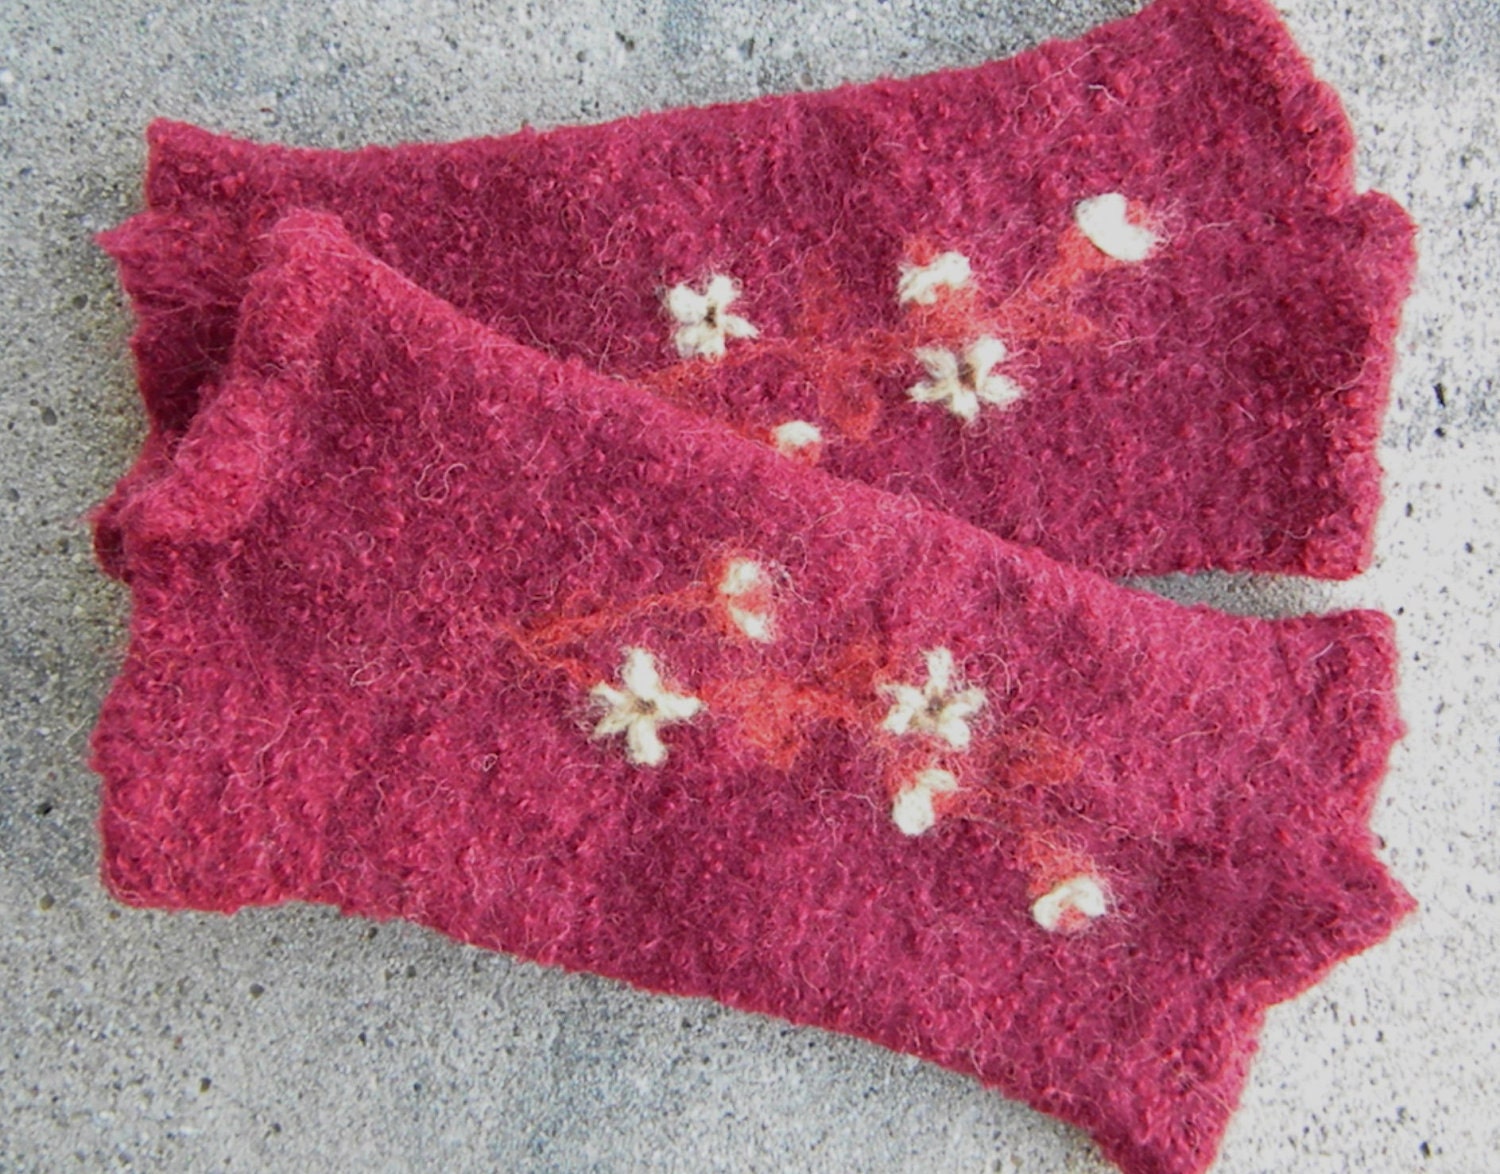 Lightweight Cranberry Red Felted Alpaca Cuffs , Bittersweet - To Be Gifted at the 2012 GBK Productions Golden Globe Gift Lounge